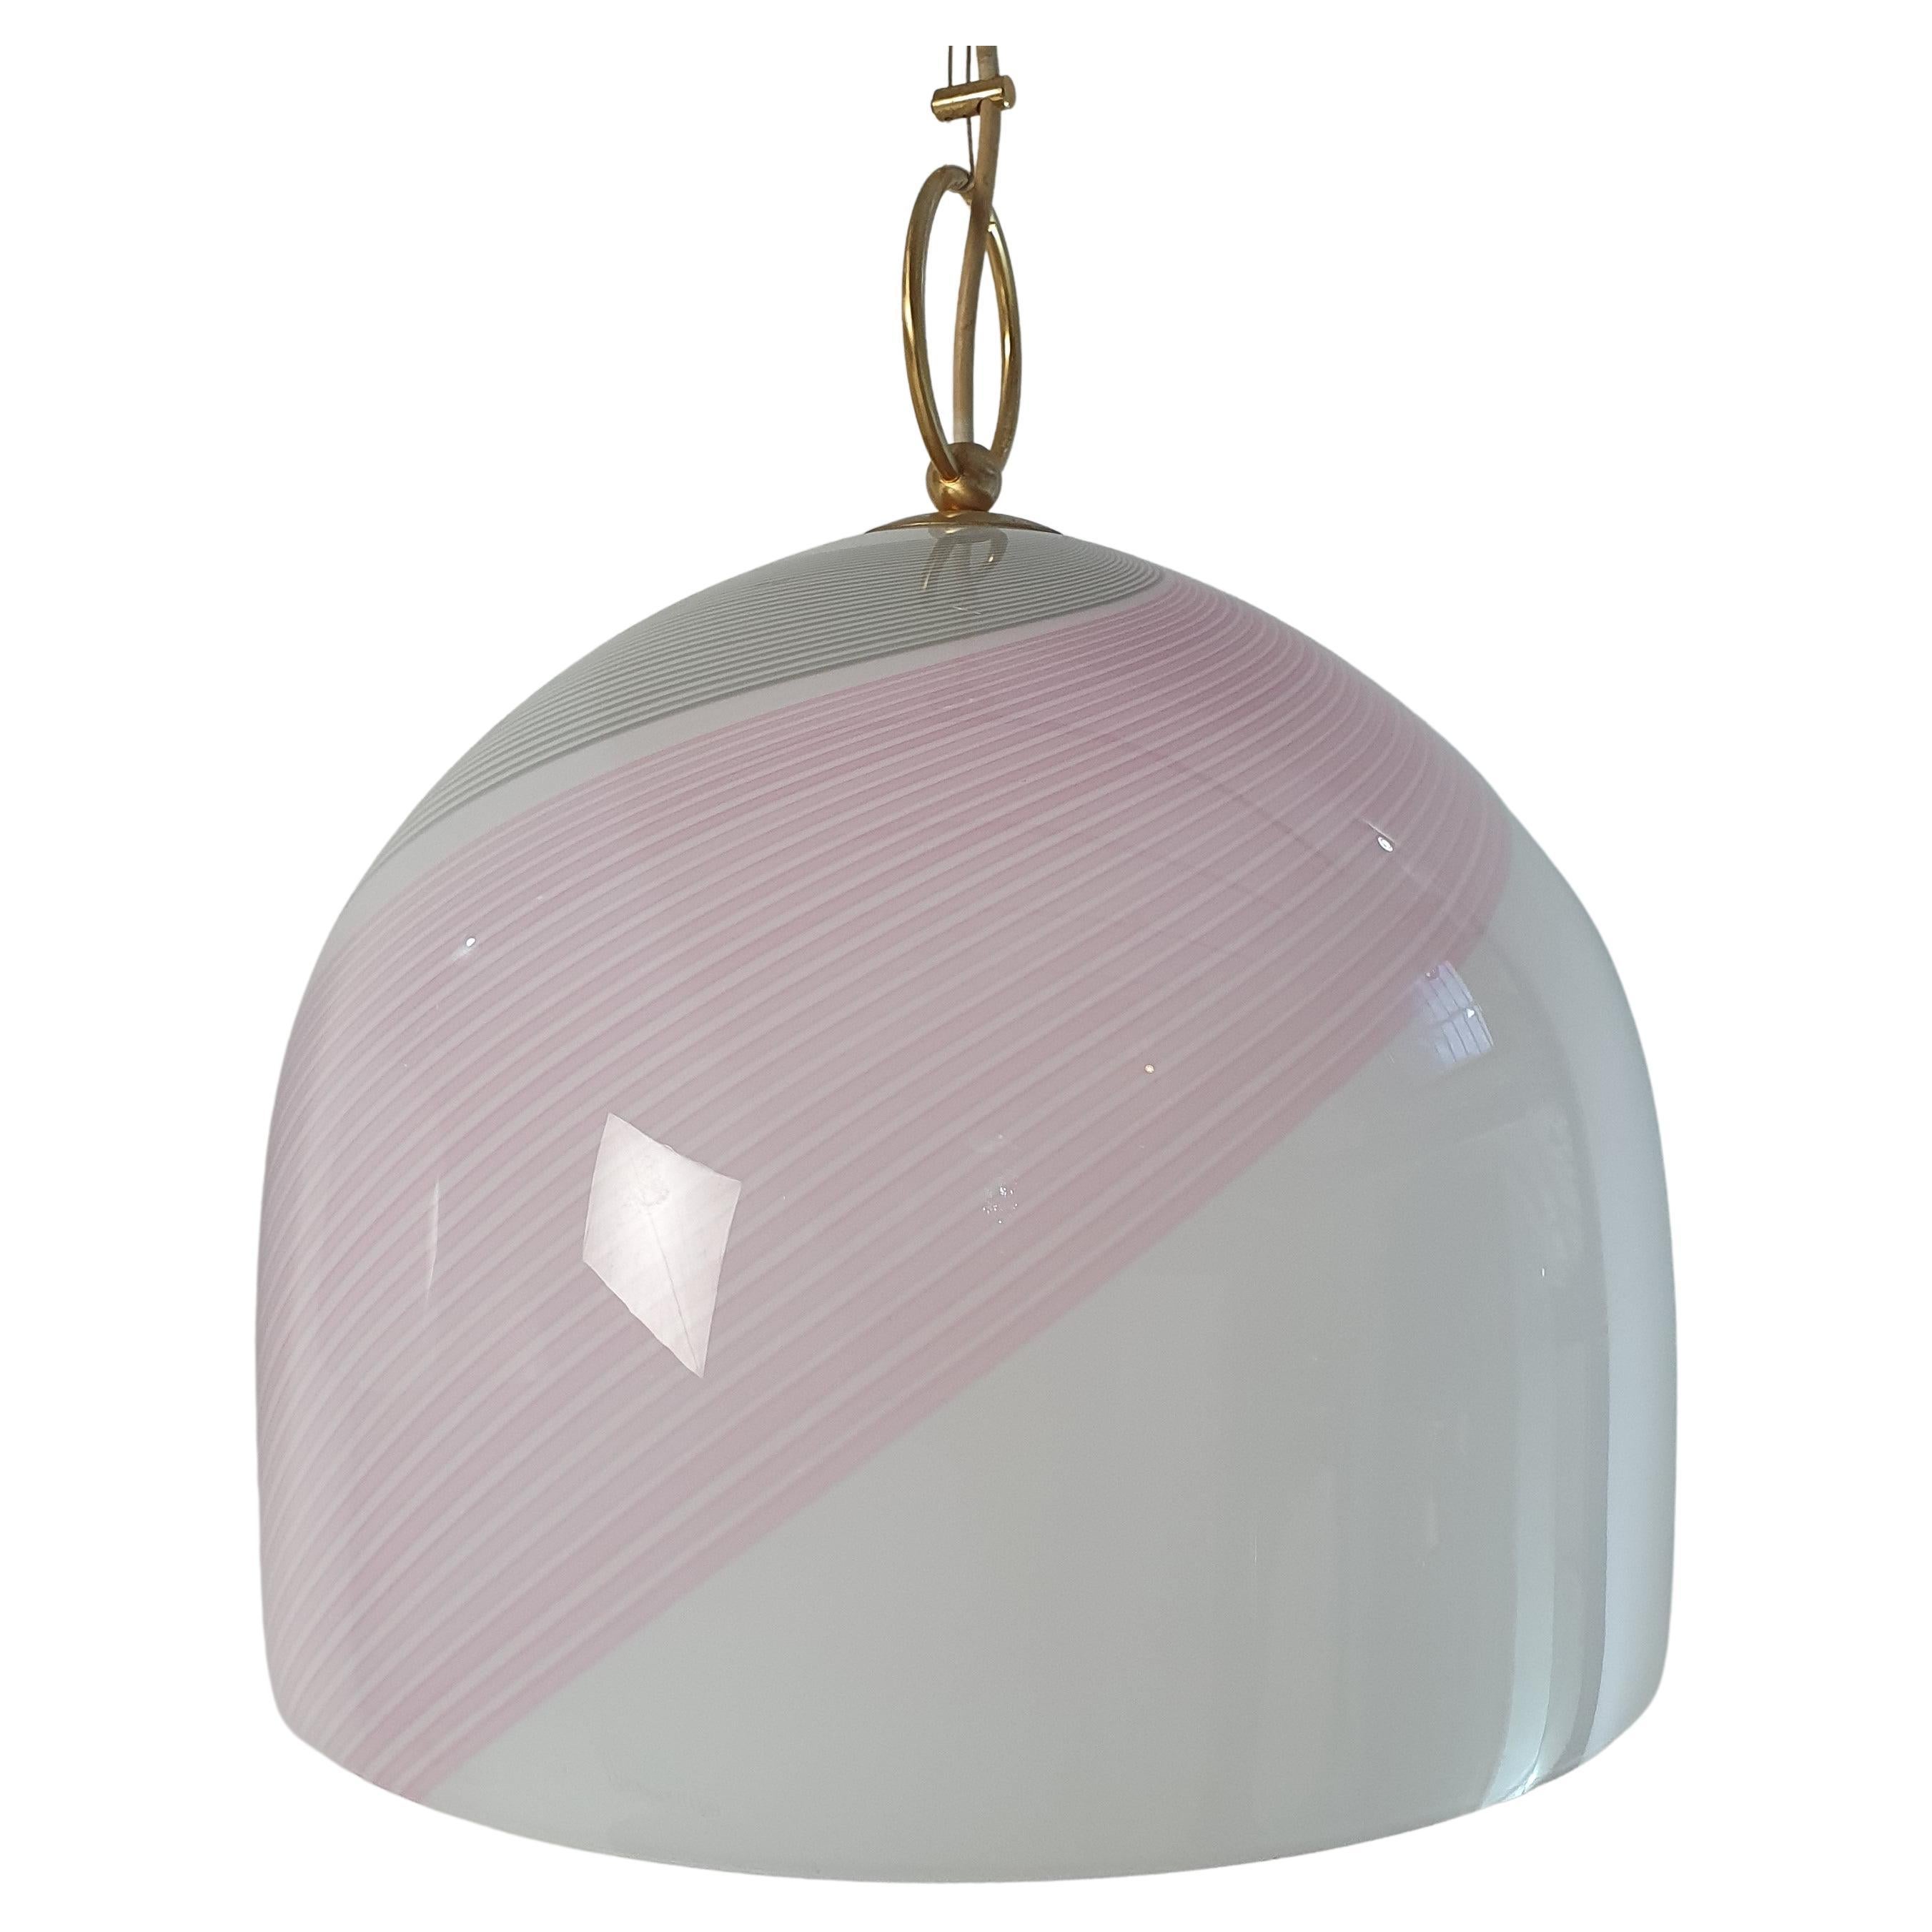 These exquisite pendant lights are a true Italian masterpiece, crafted by the renowned Lino Tagliapietra for La Murrina in Murano during the 1970s. Handmade with white glass as the base and delicate pink and gray lines, the bell-shaped design is a